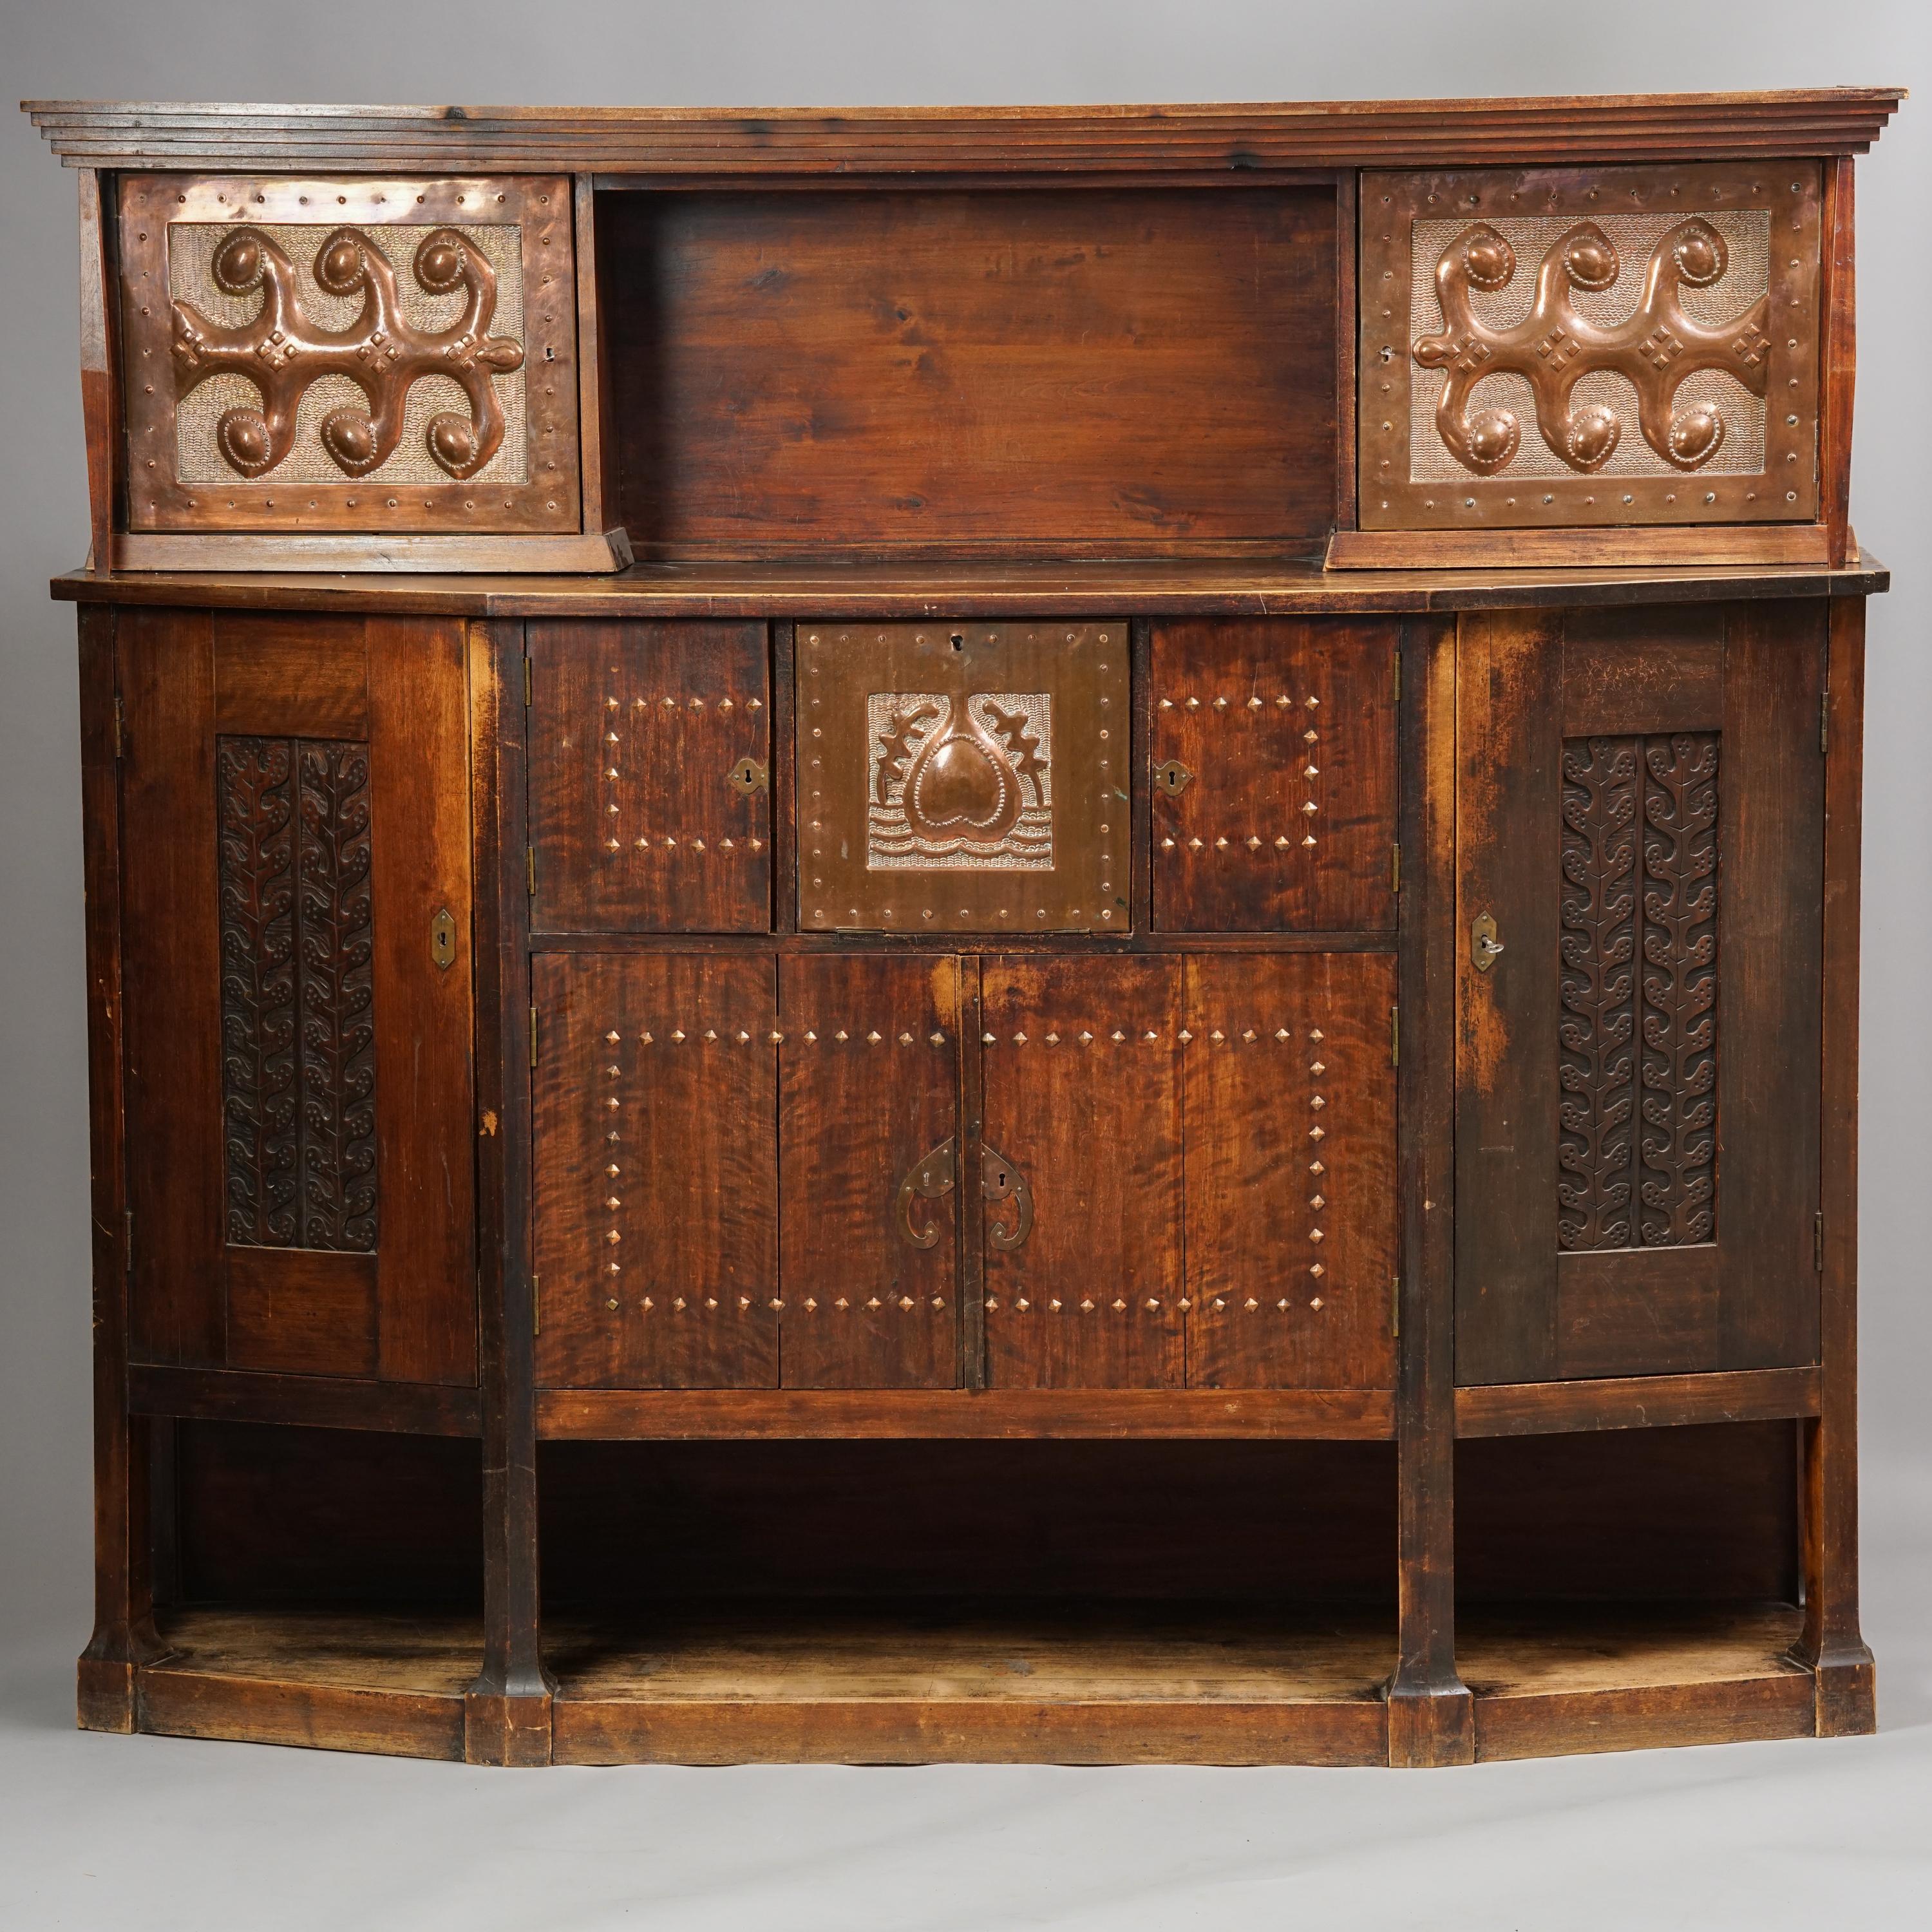 Jugend cabinet by Eliel Saarinen from the early 1900s. Originally designed to the Nordic Share Bank. The same symbol can be found in the archive pictures of the bank. Solid wood with copper details. Beautiful craftsmanship. Good vintage condition,